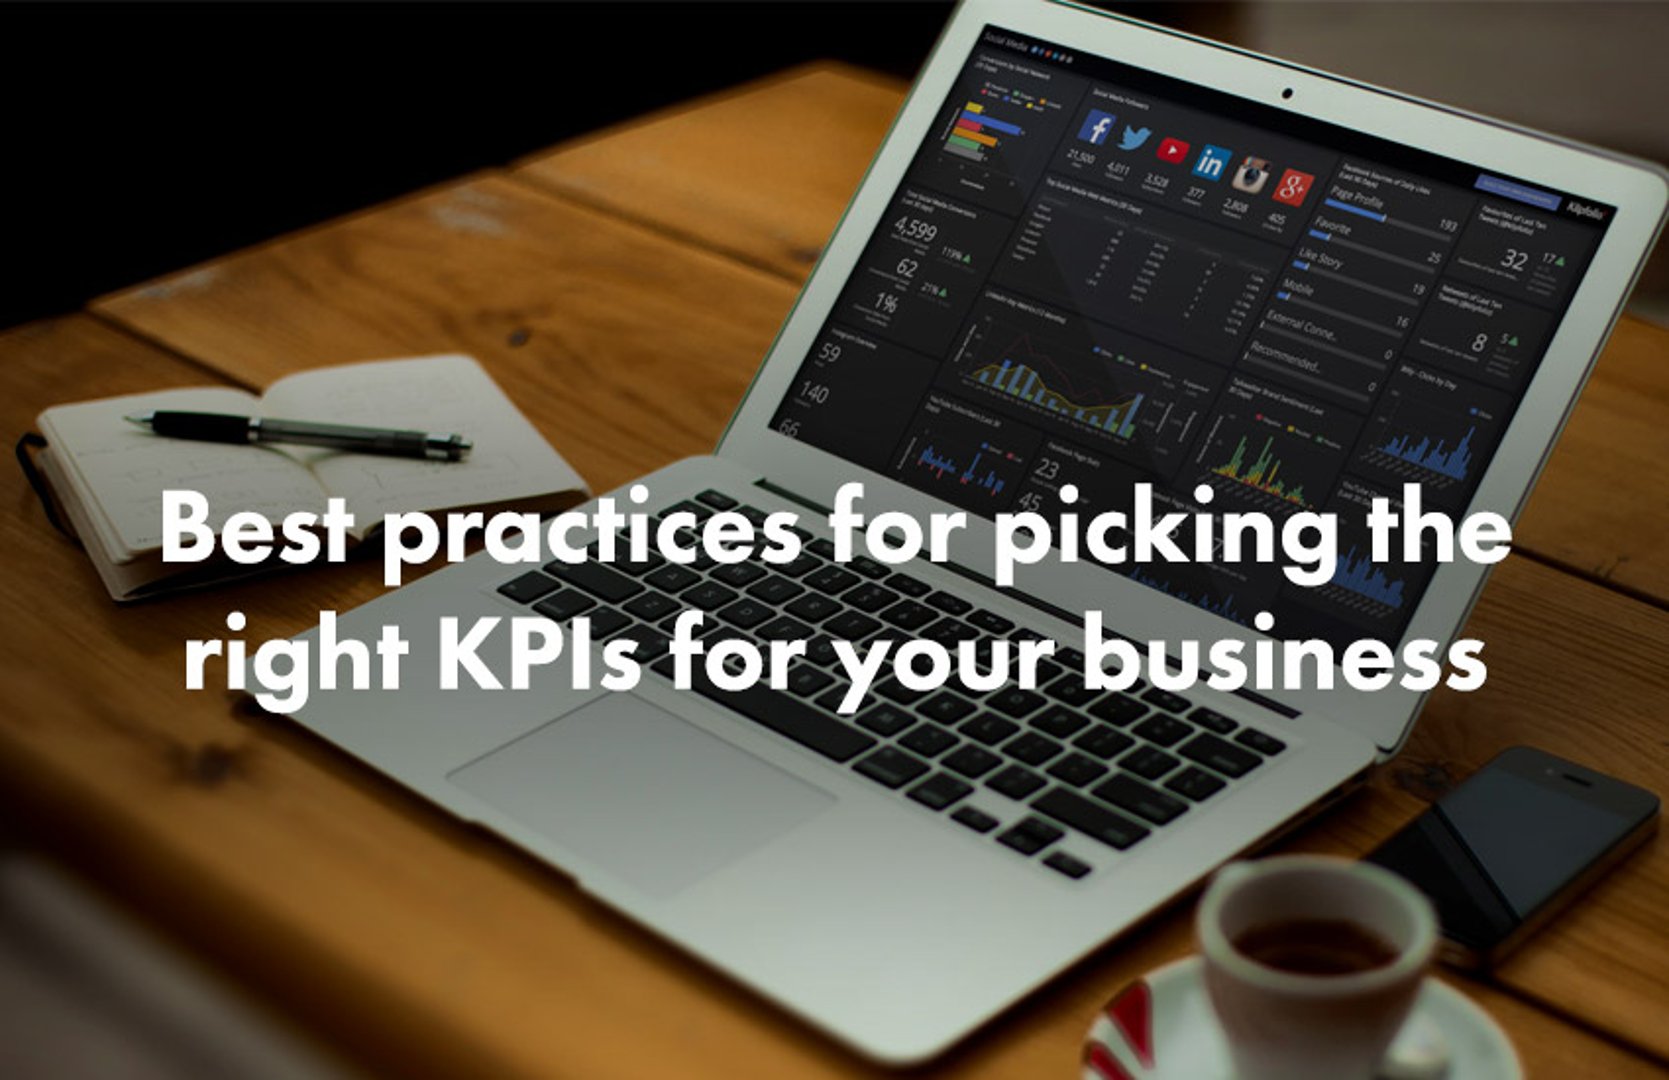 Best Practices for Picking Business Kpis